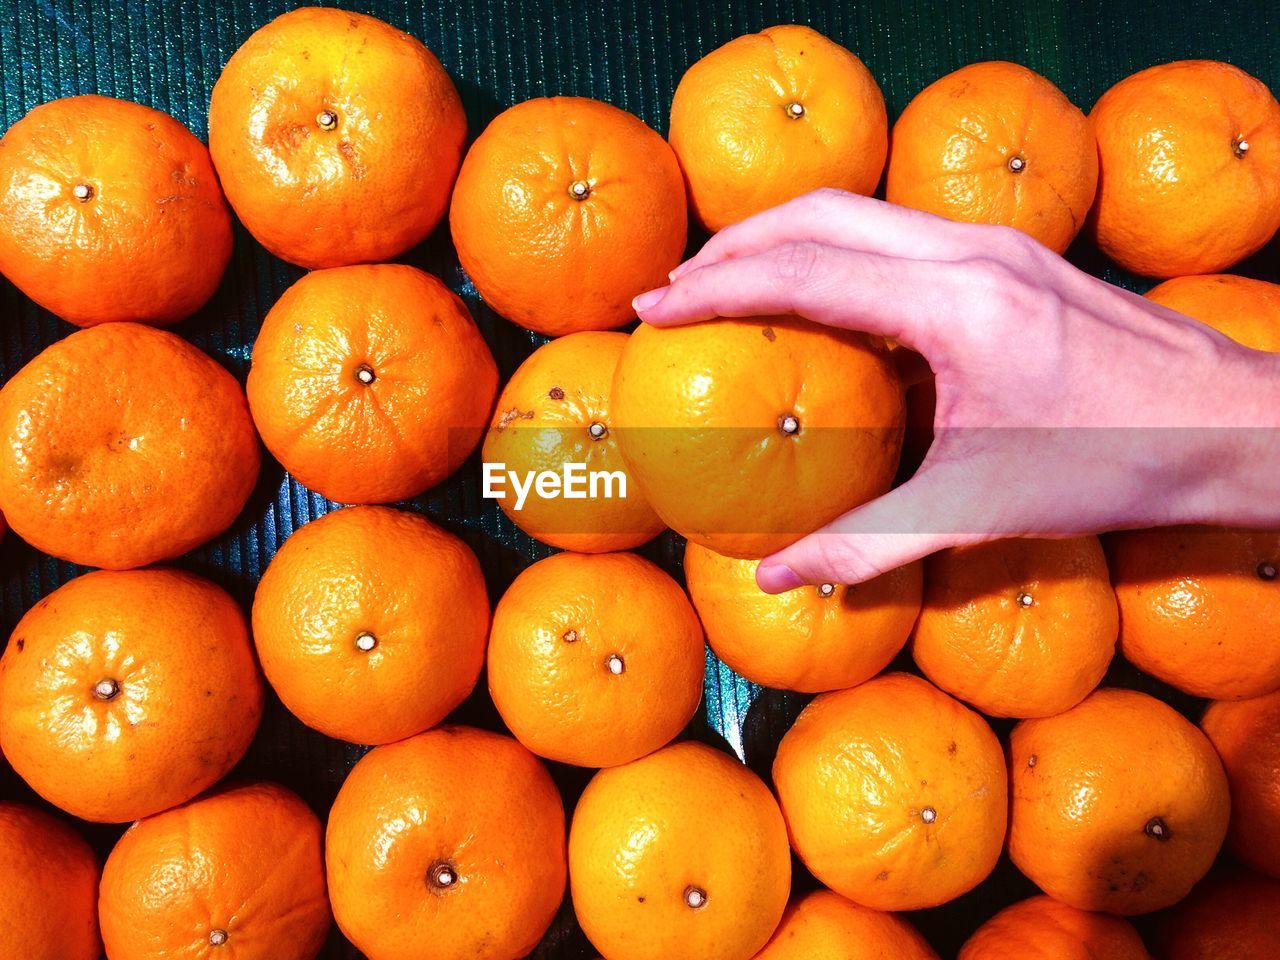 High angle view of hand holding orange fruit in market